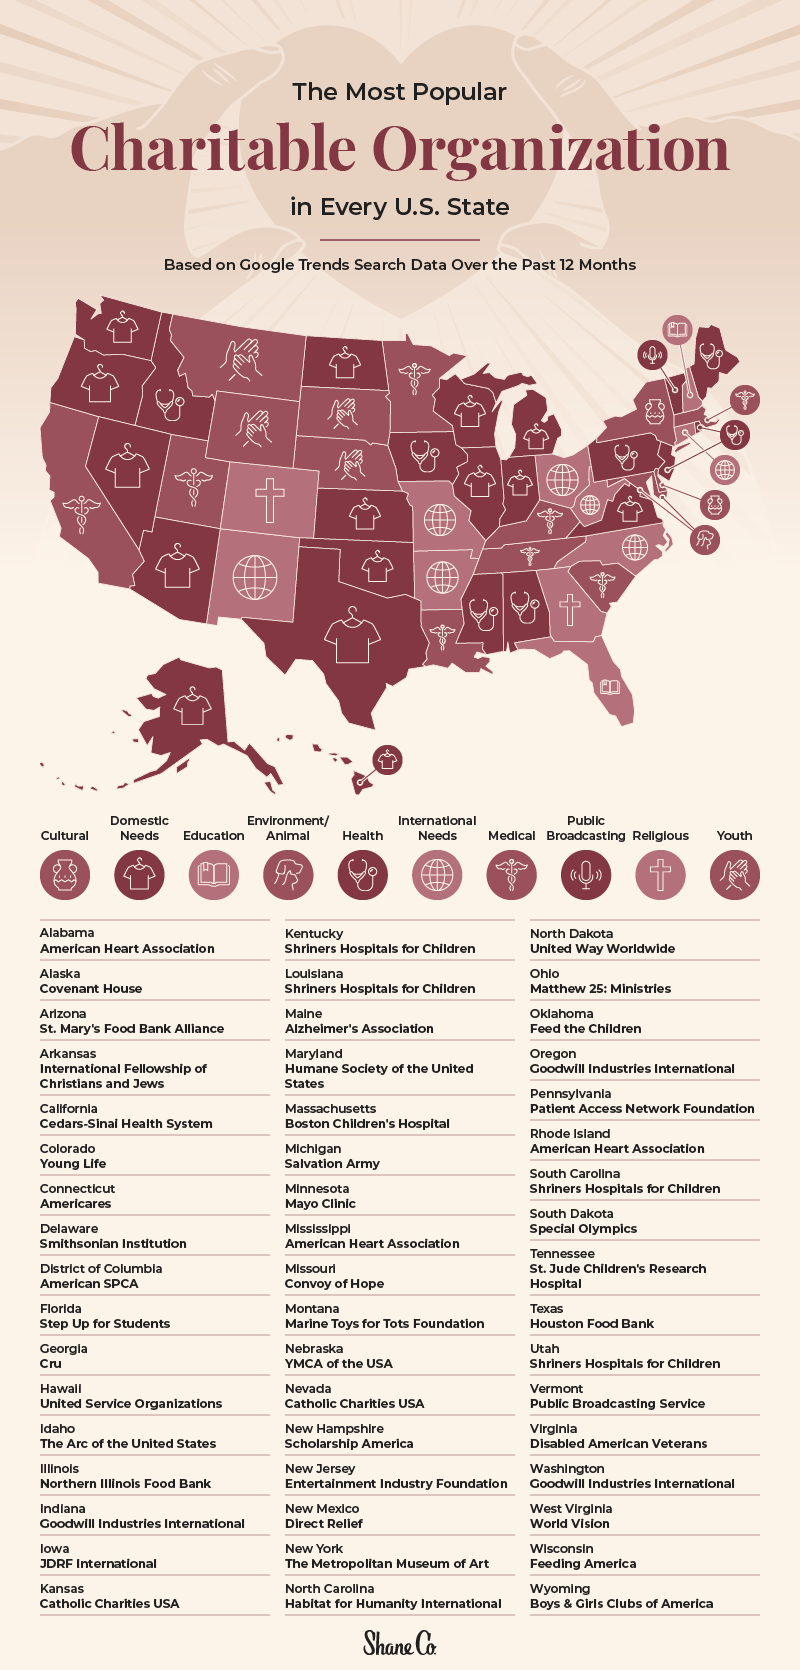 Graphic showing the most popular charitable organizations in each U.S. state.